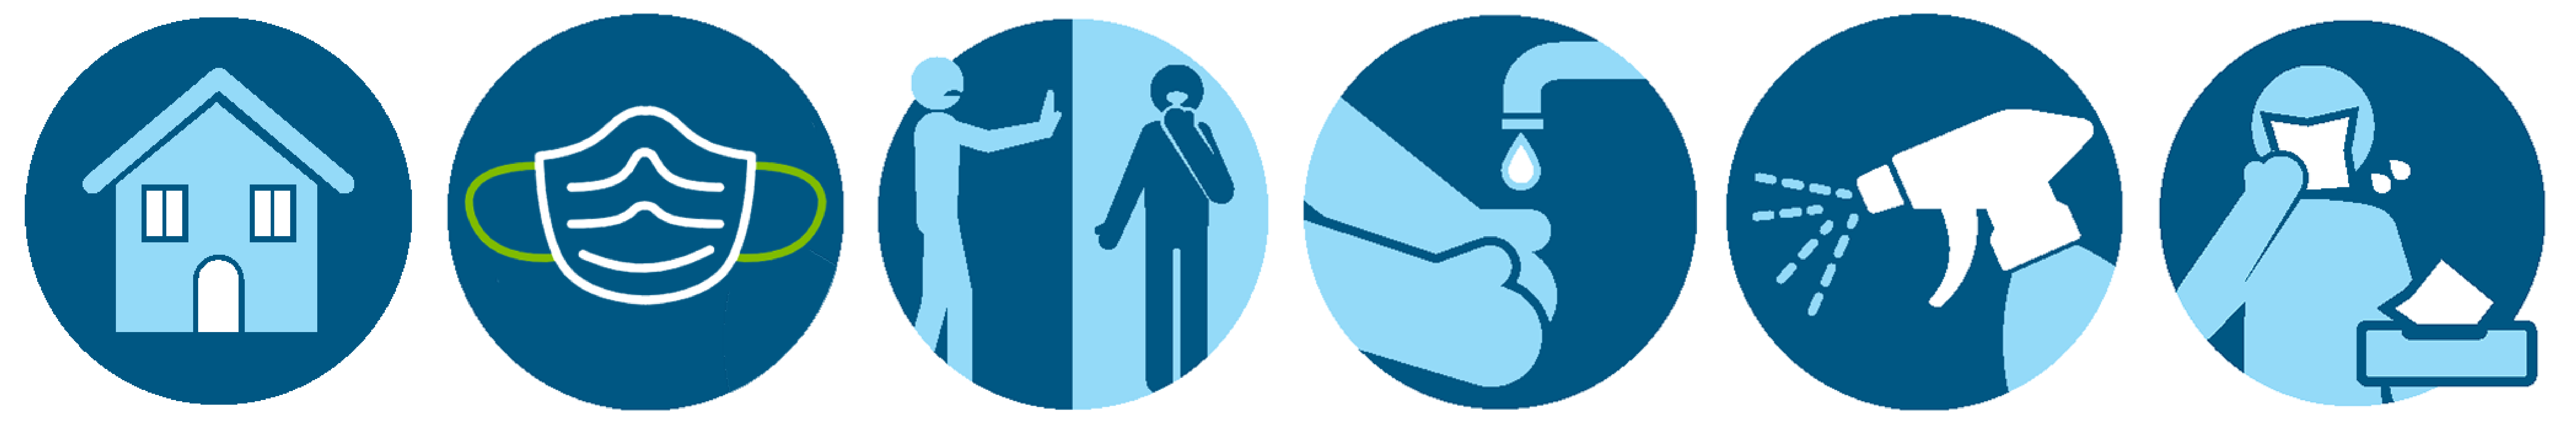 COVID Prevention Icons